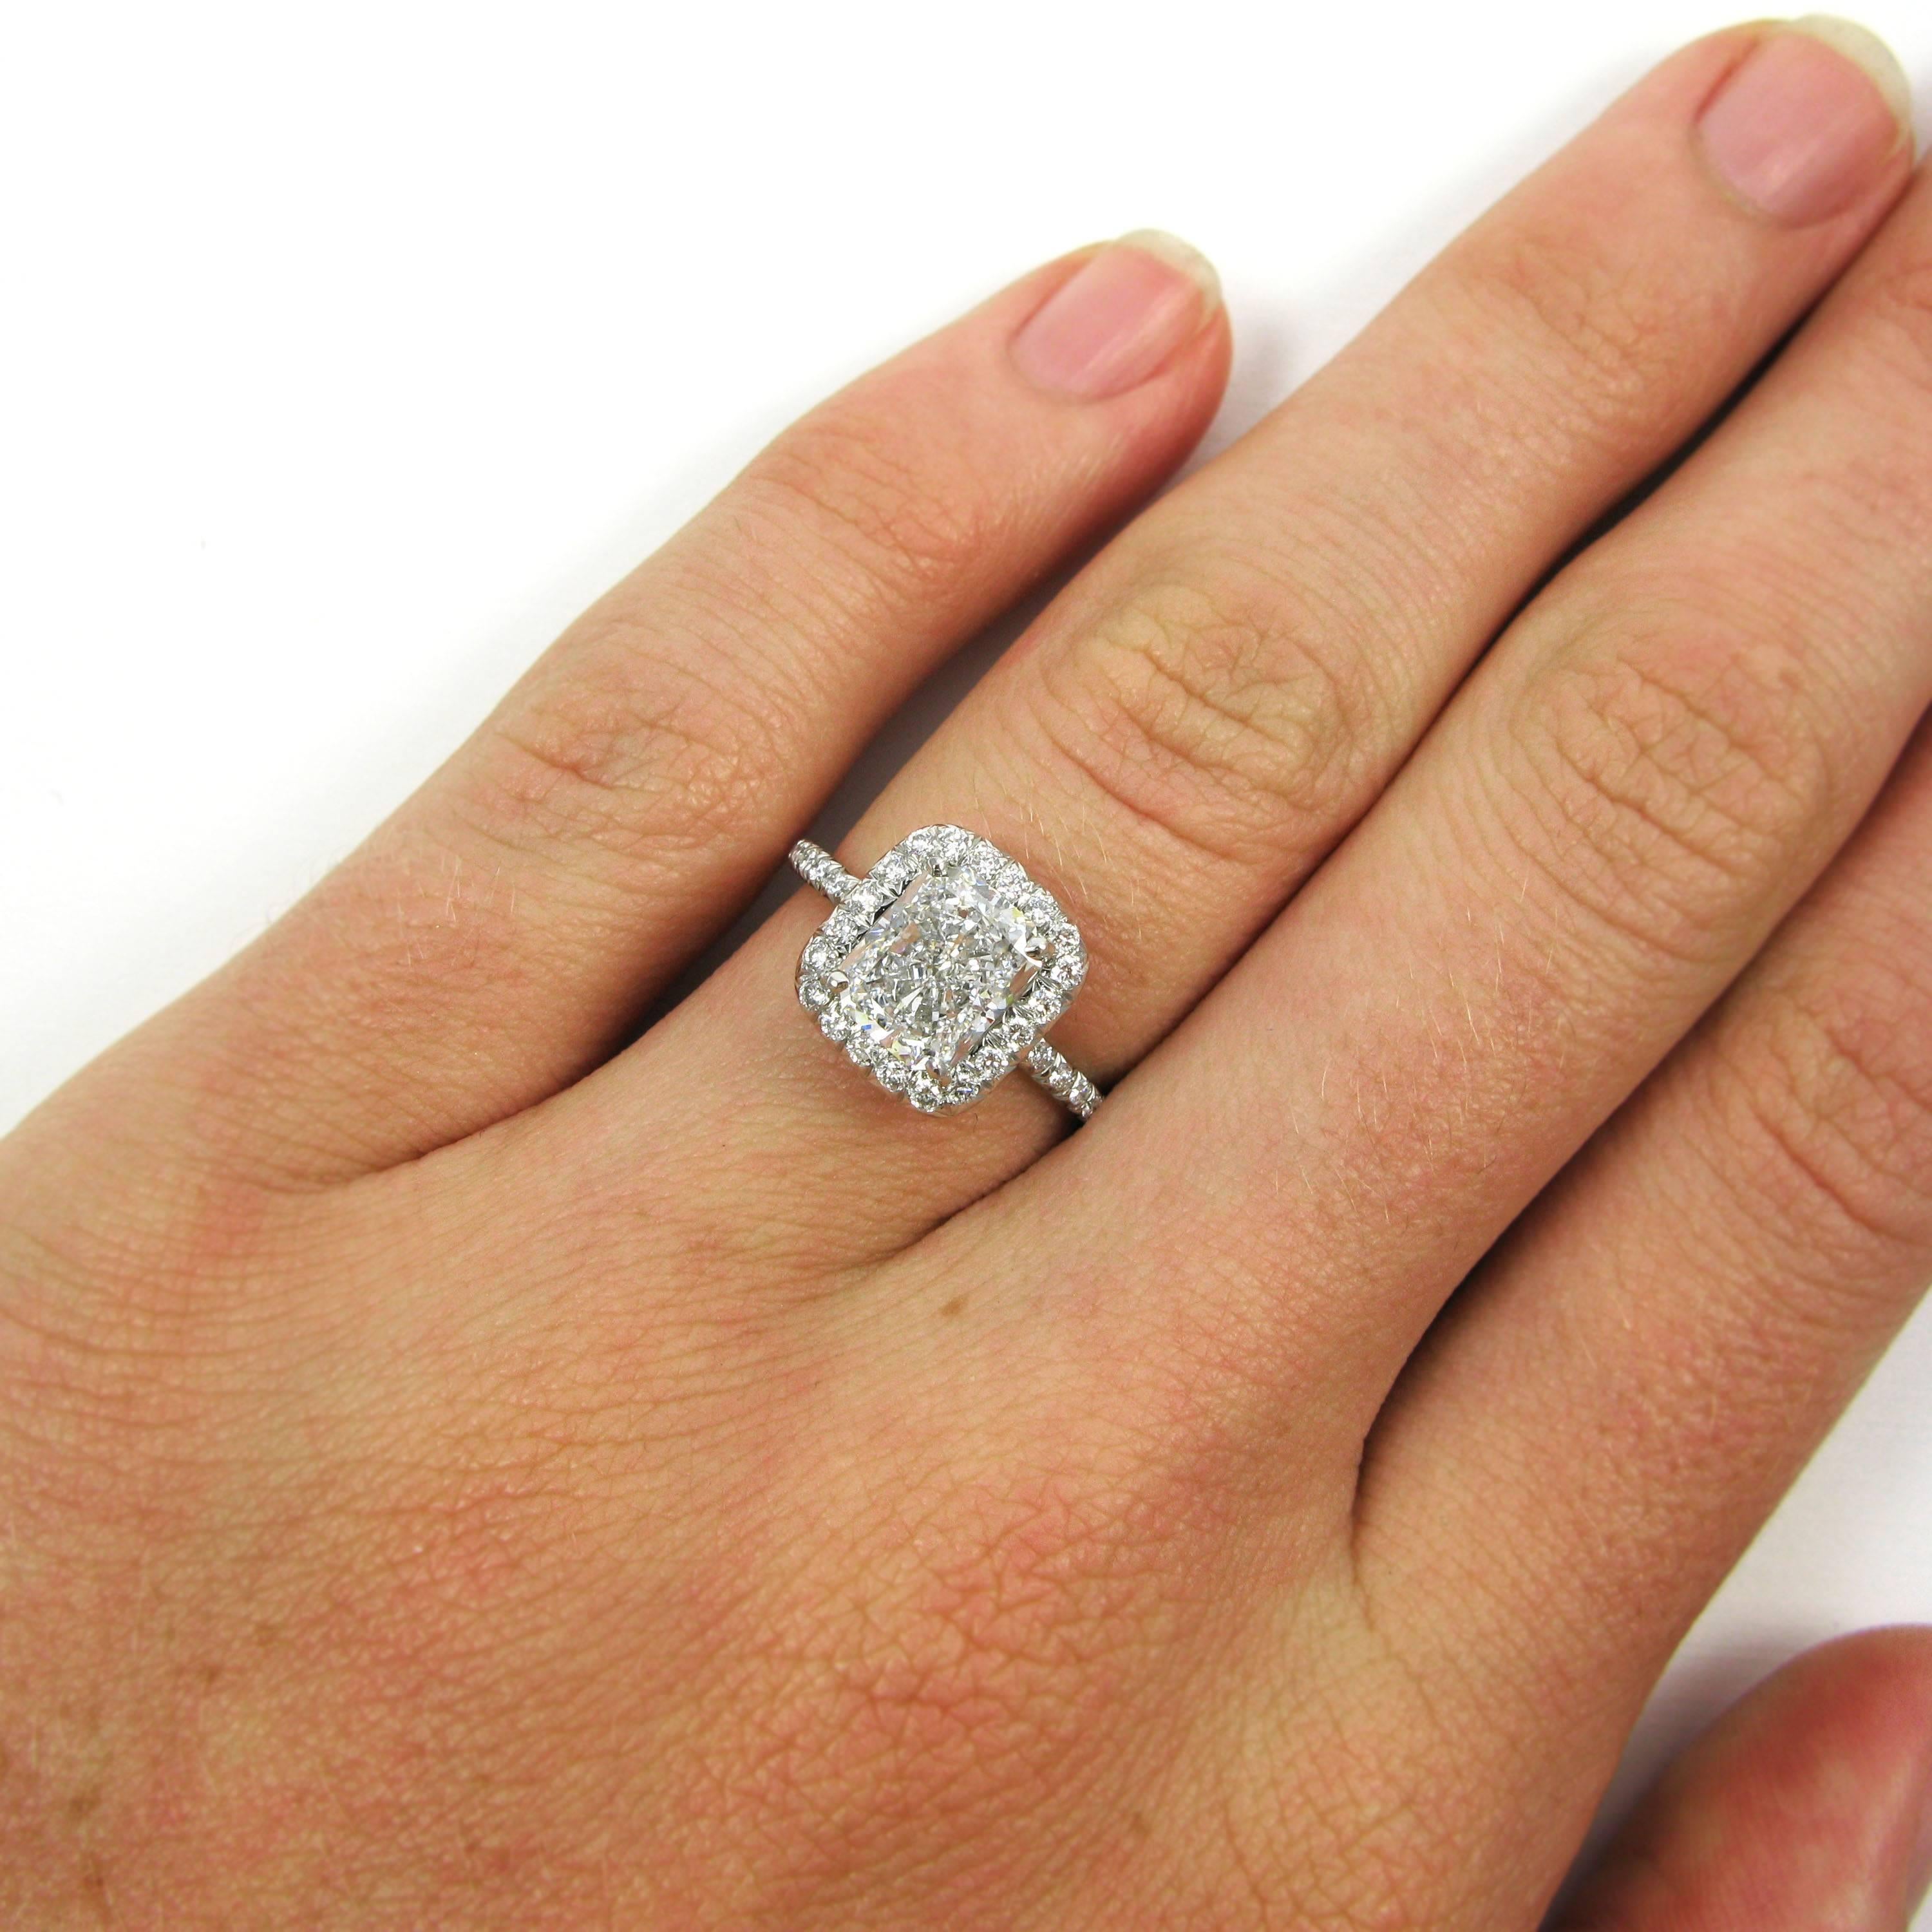 A lovely 1.80 carat radiant-cut diamond with E color and SI1 clarity is set in a platinum frame ring accented by 0.58 carat of pave diamond accents. 

Purchase includes GIA Diamond Grading Report 5166834140, which states that the 1.80 carat